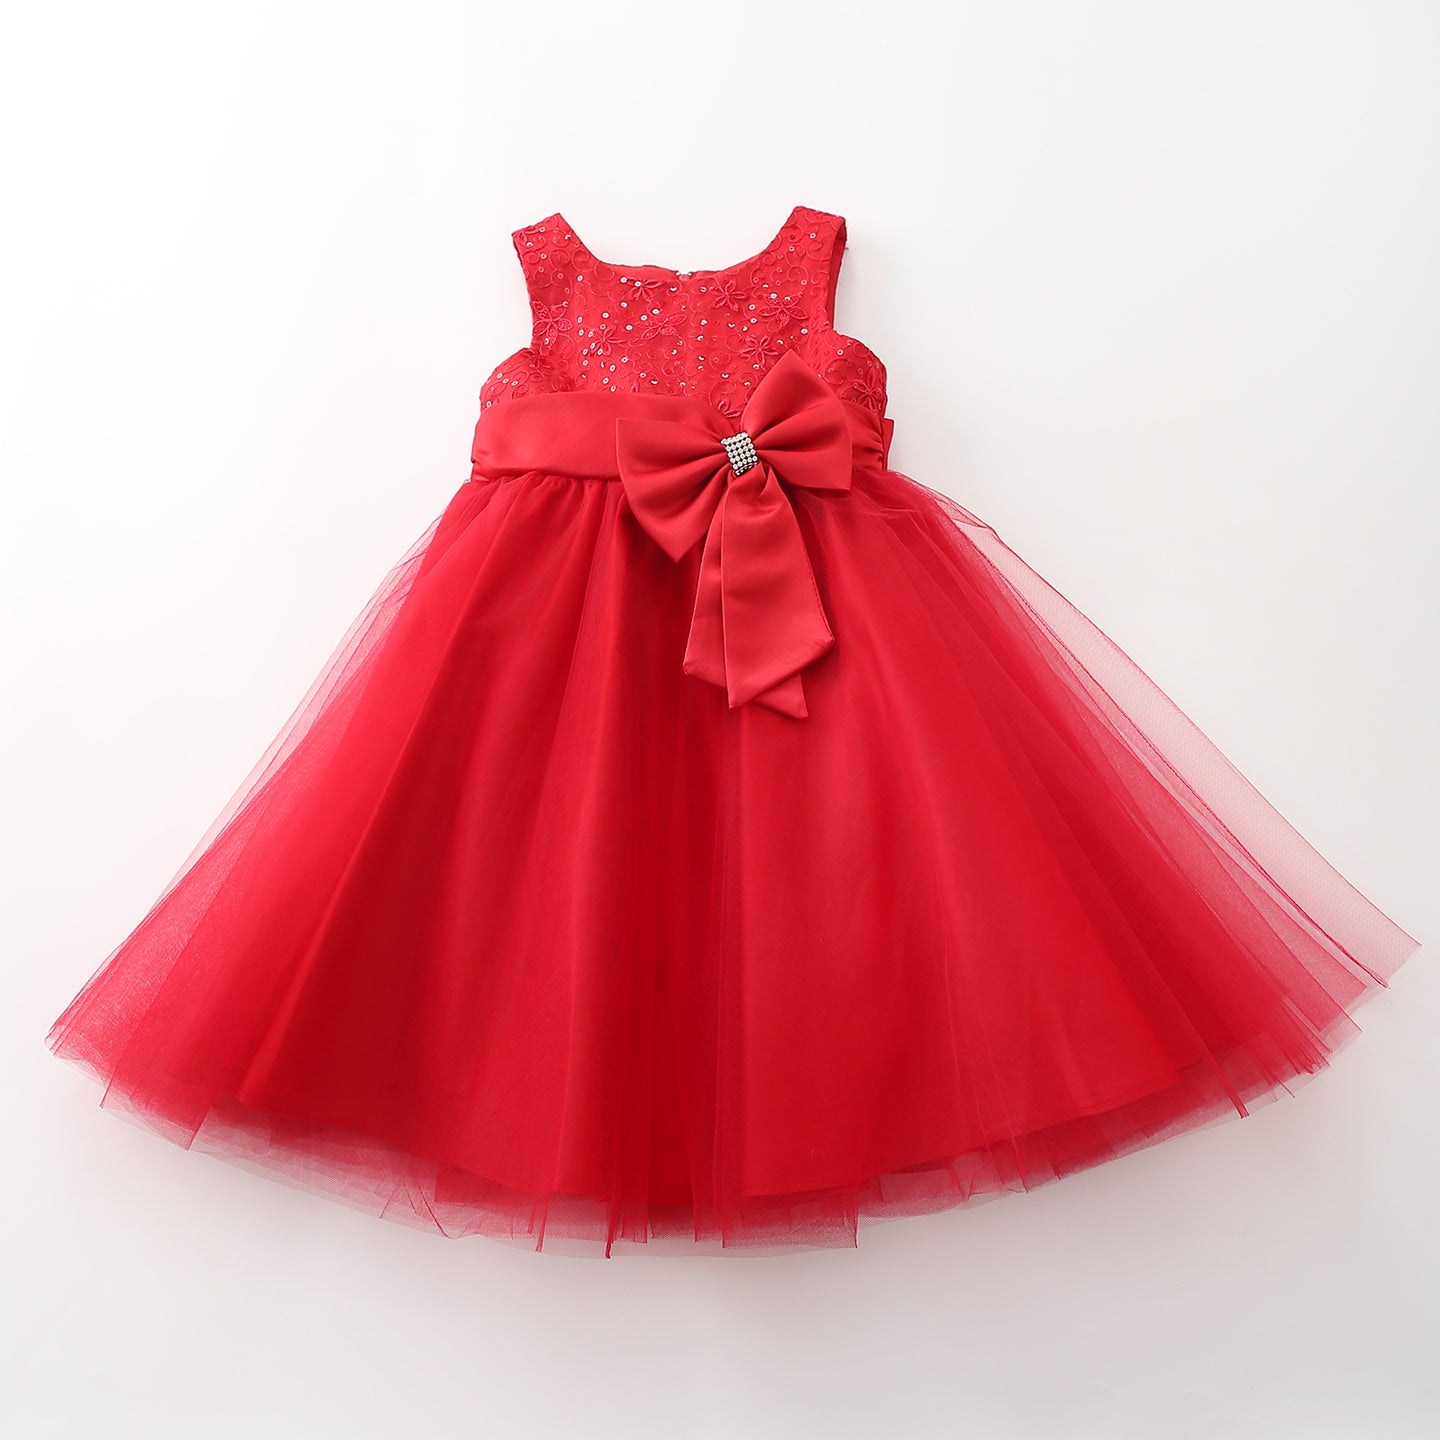 Girls' Formal Event Red Tulle Dress